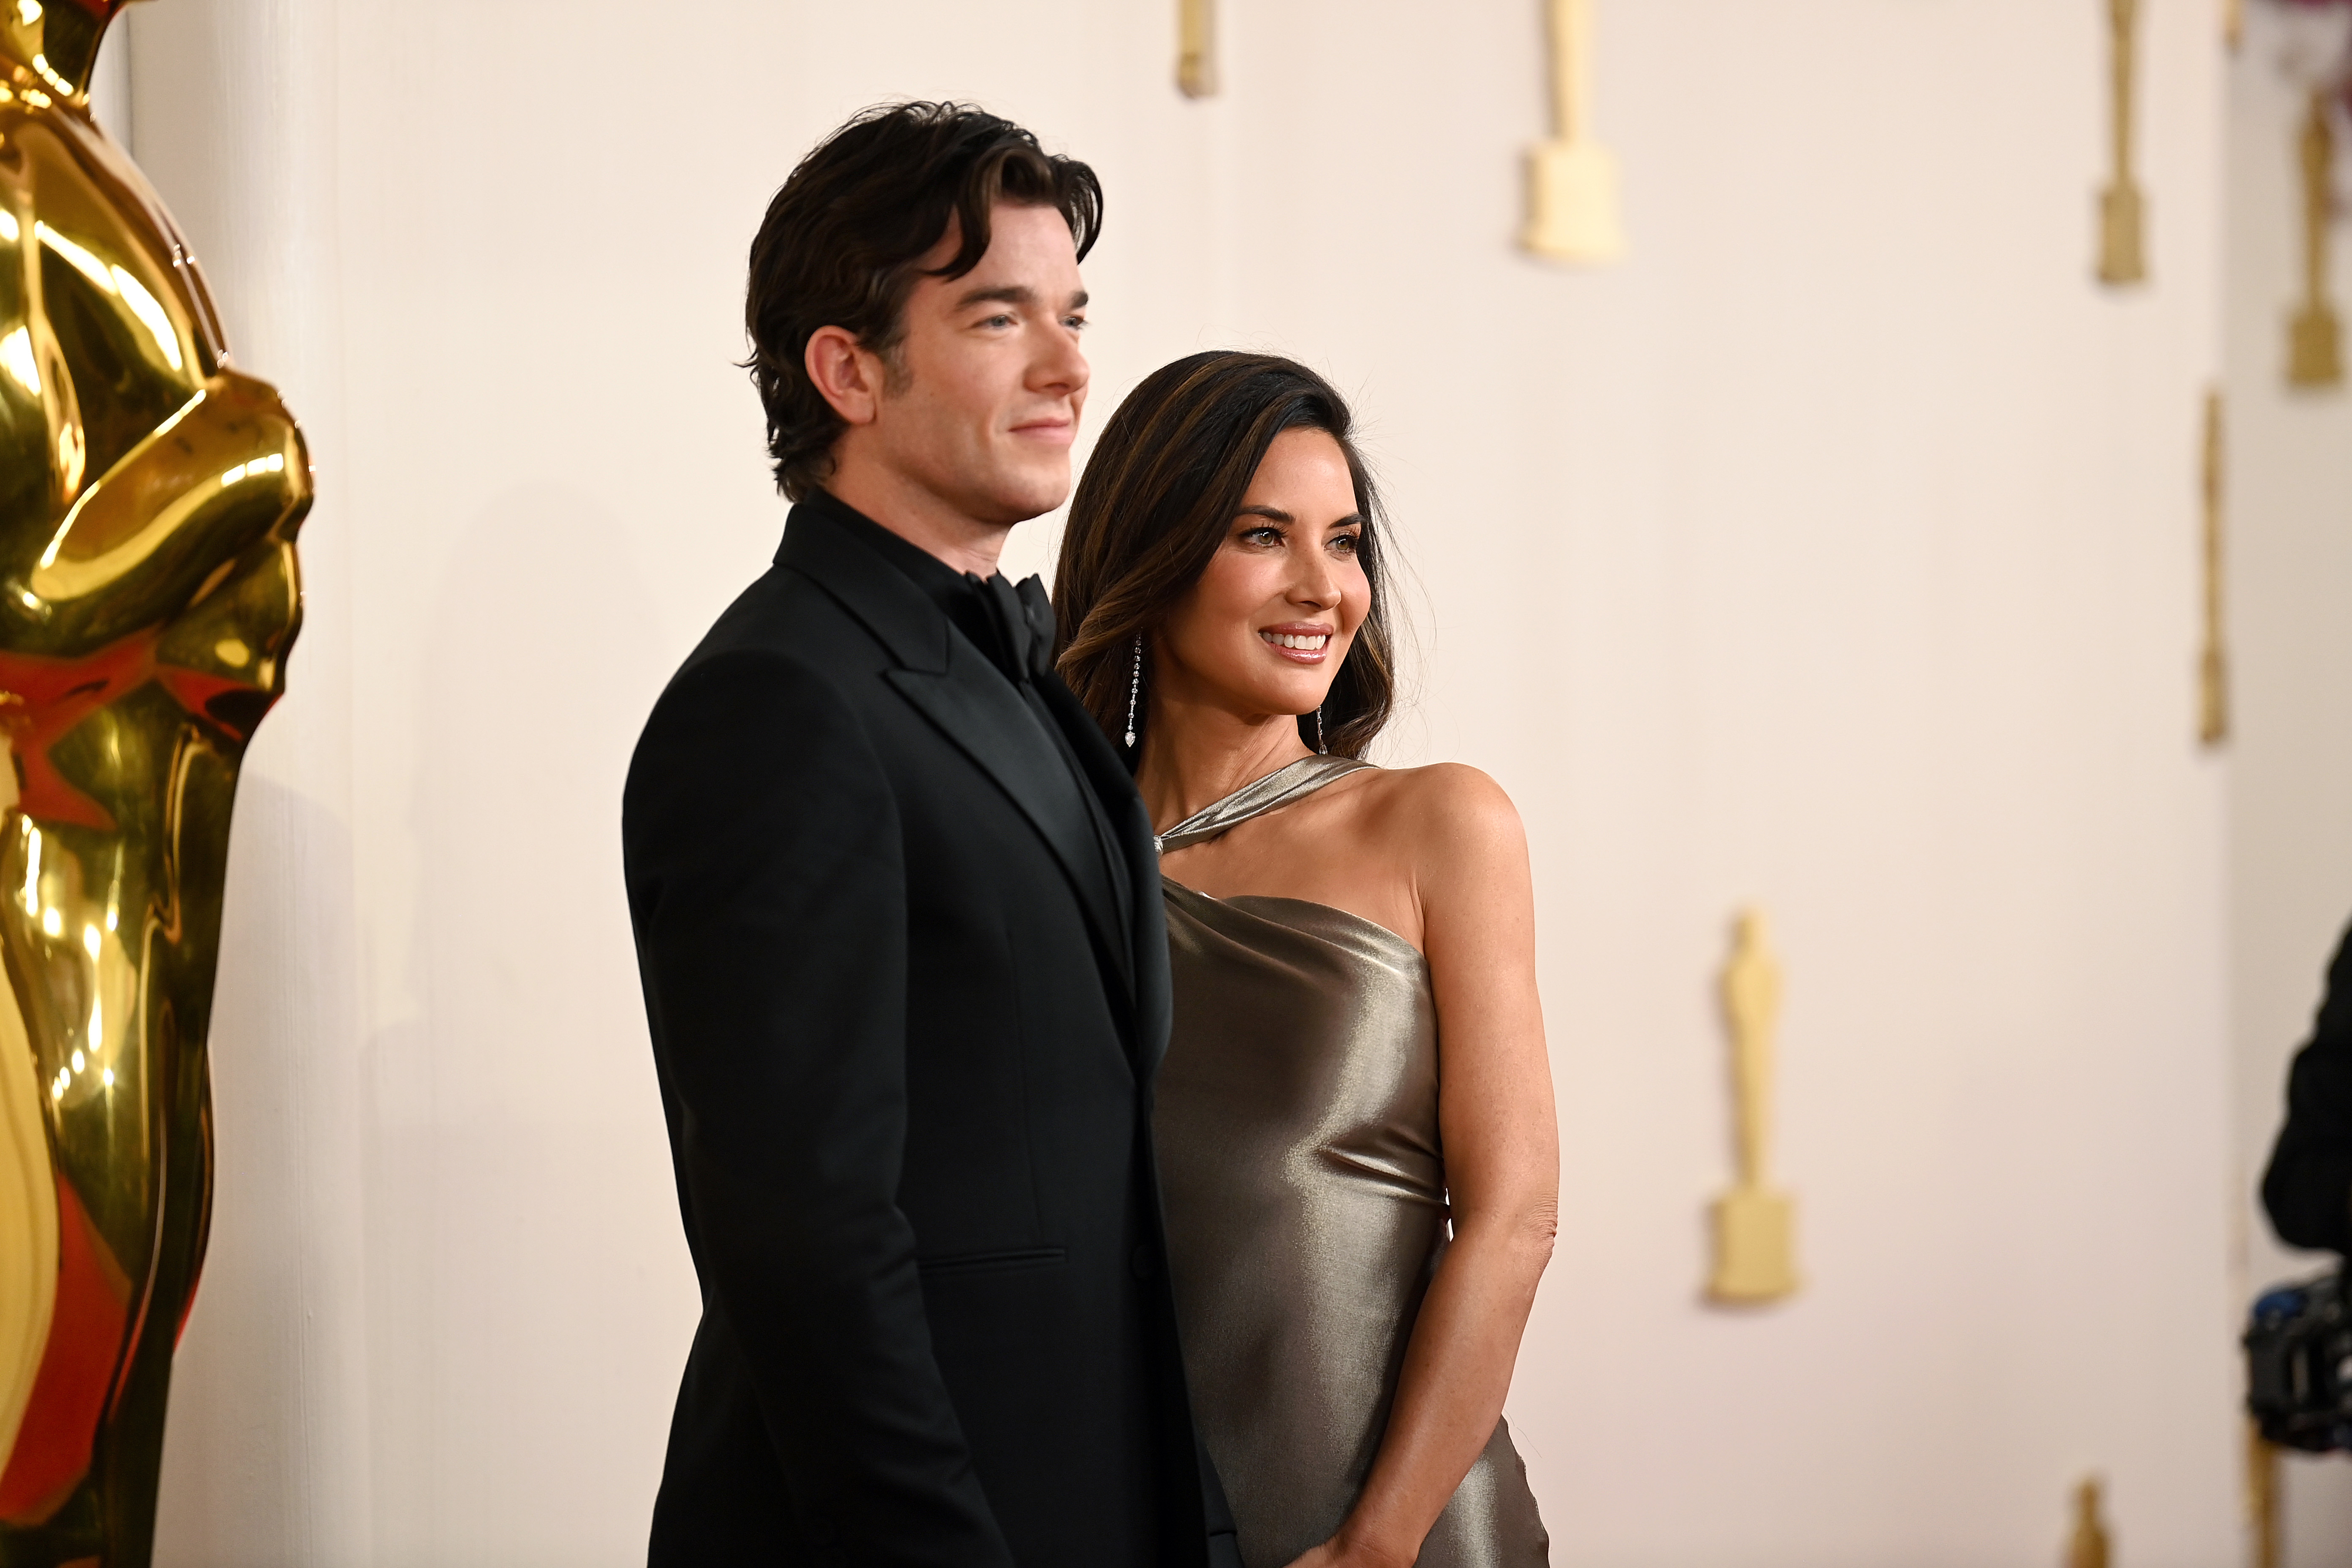 John Mulaney and Olivia Munn pose together for photographers on the red carpet